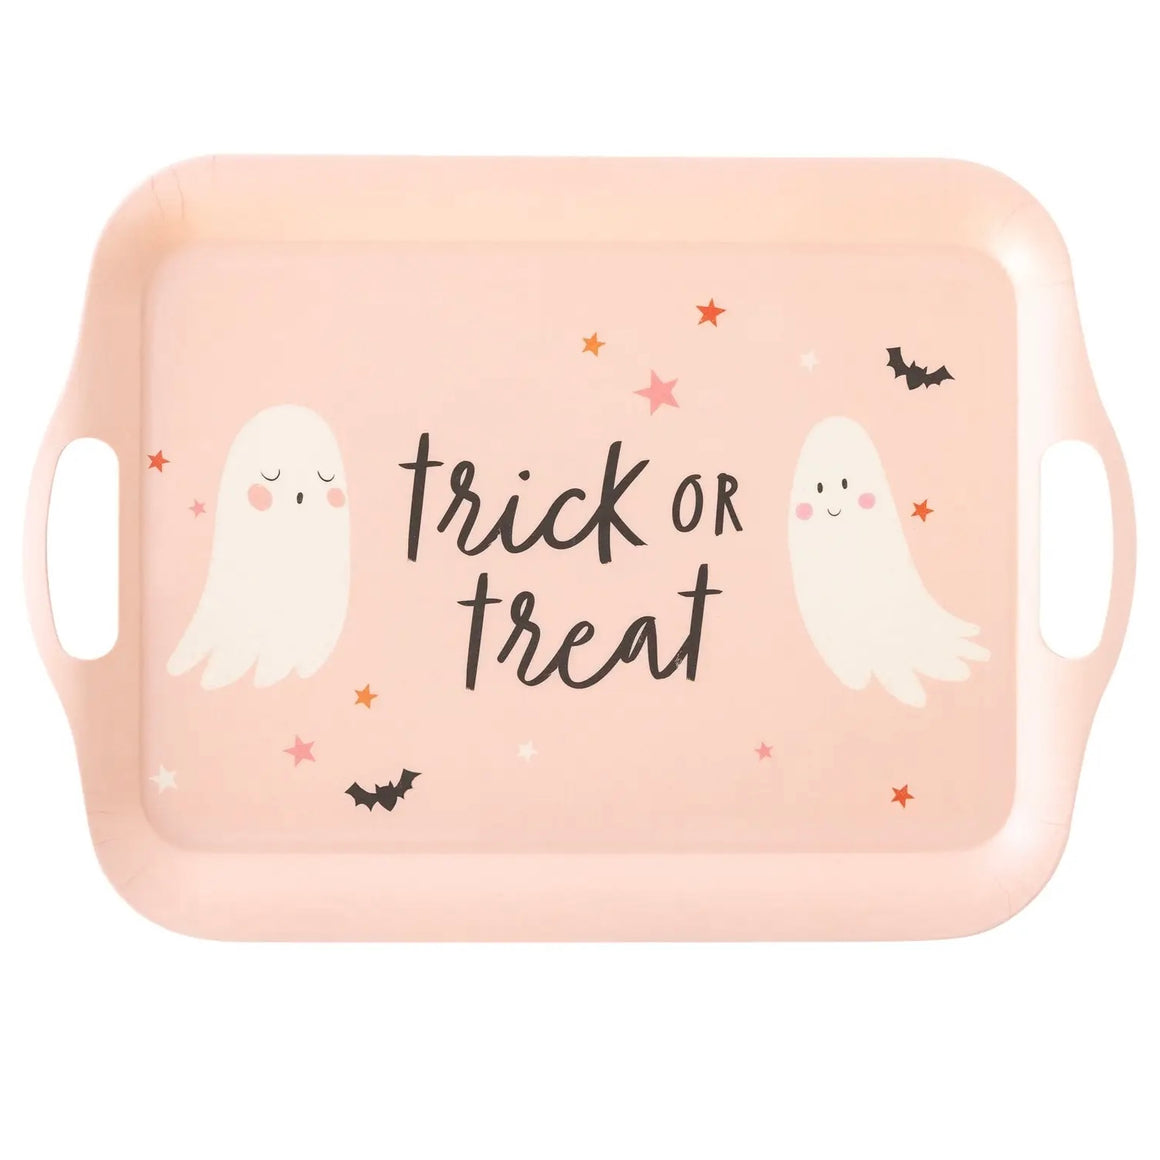 SERVING TRAY - PINK HALLOWEEN BAMBOO TRAY